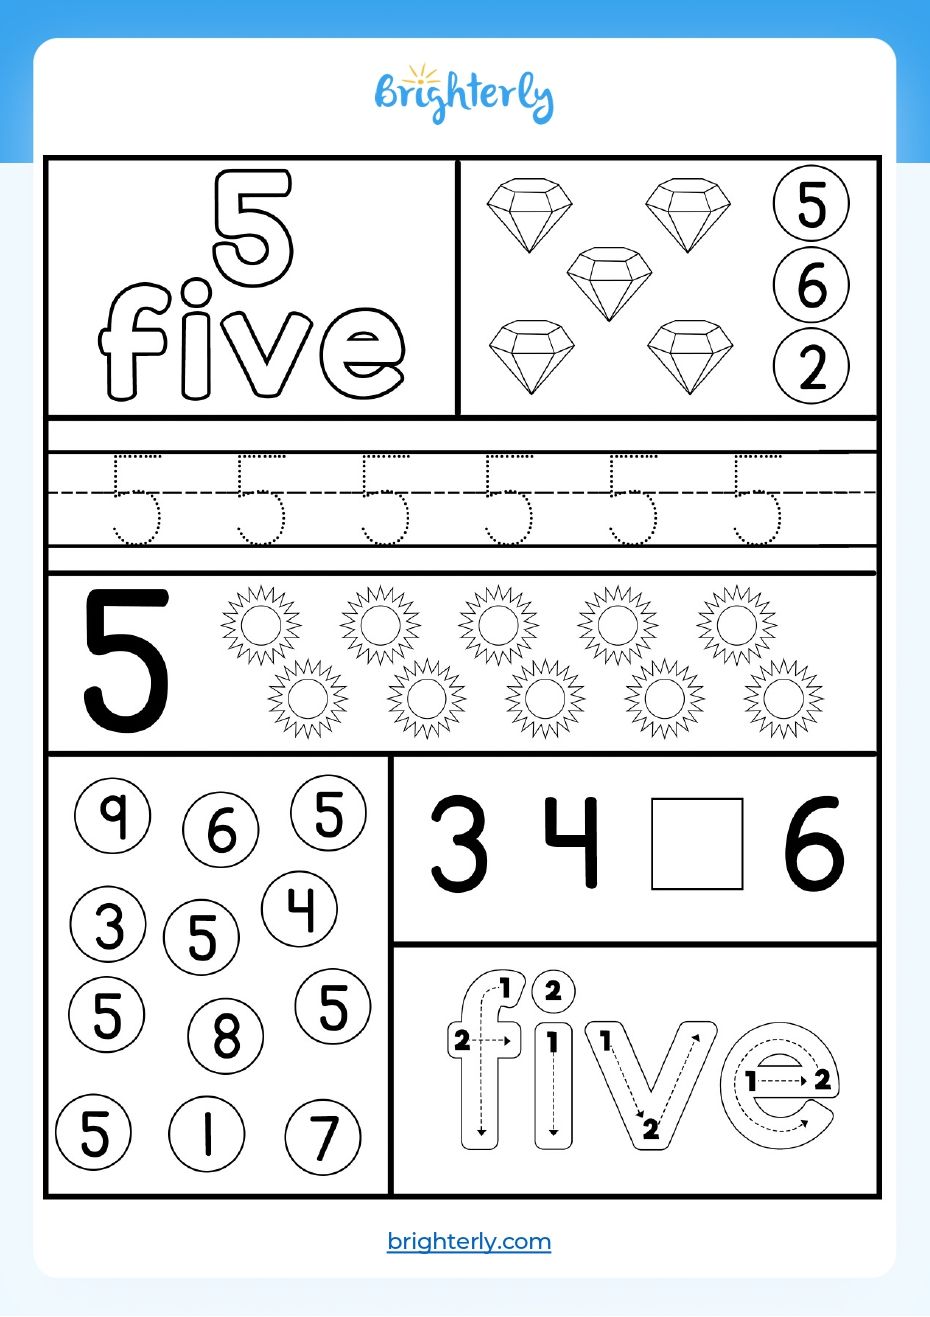 free-printable-number-5-five-worksheets-for-kids-pdfs-brighterly